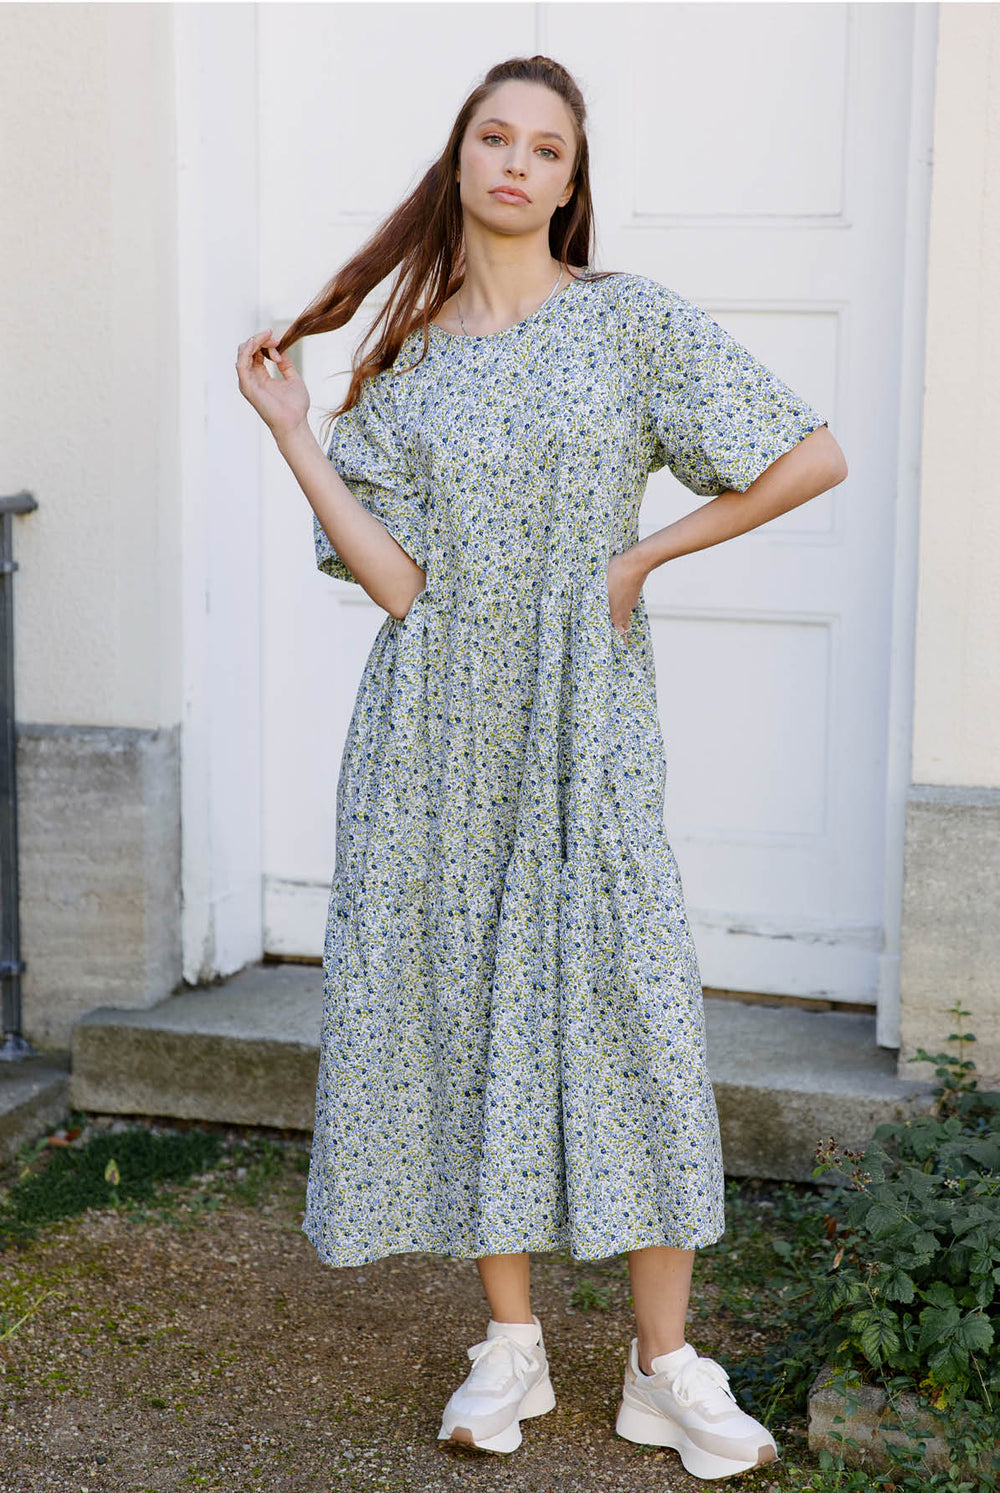 Woman wearing the Utah Dress sewing pattern from JULIANA MARTEJEVS on The Fold Line. A dress pattern made in cotton poplin fabrics, featuring a loose fit, wide elbow length sleeves, gathered tiers, midi length, side pockets, and tie closure at back neckli